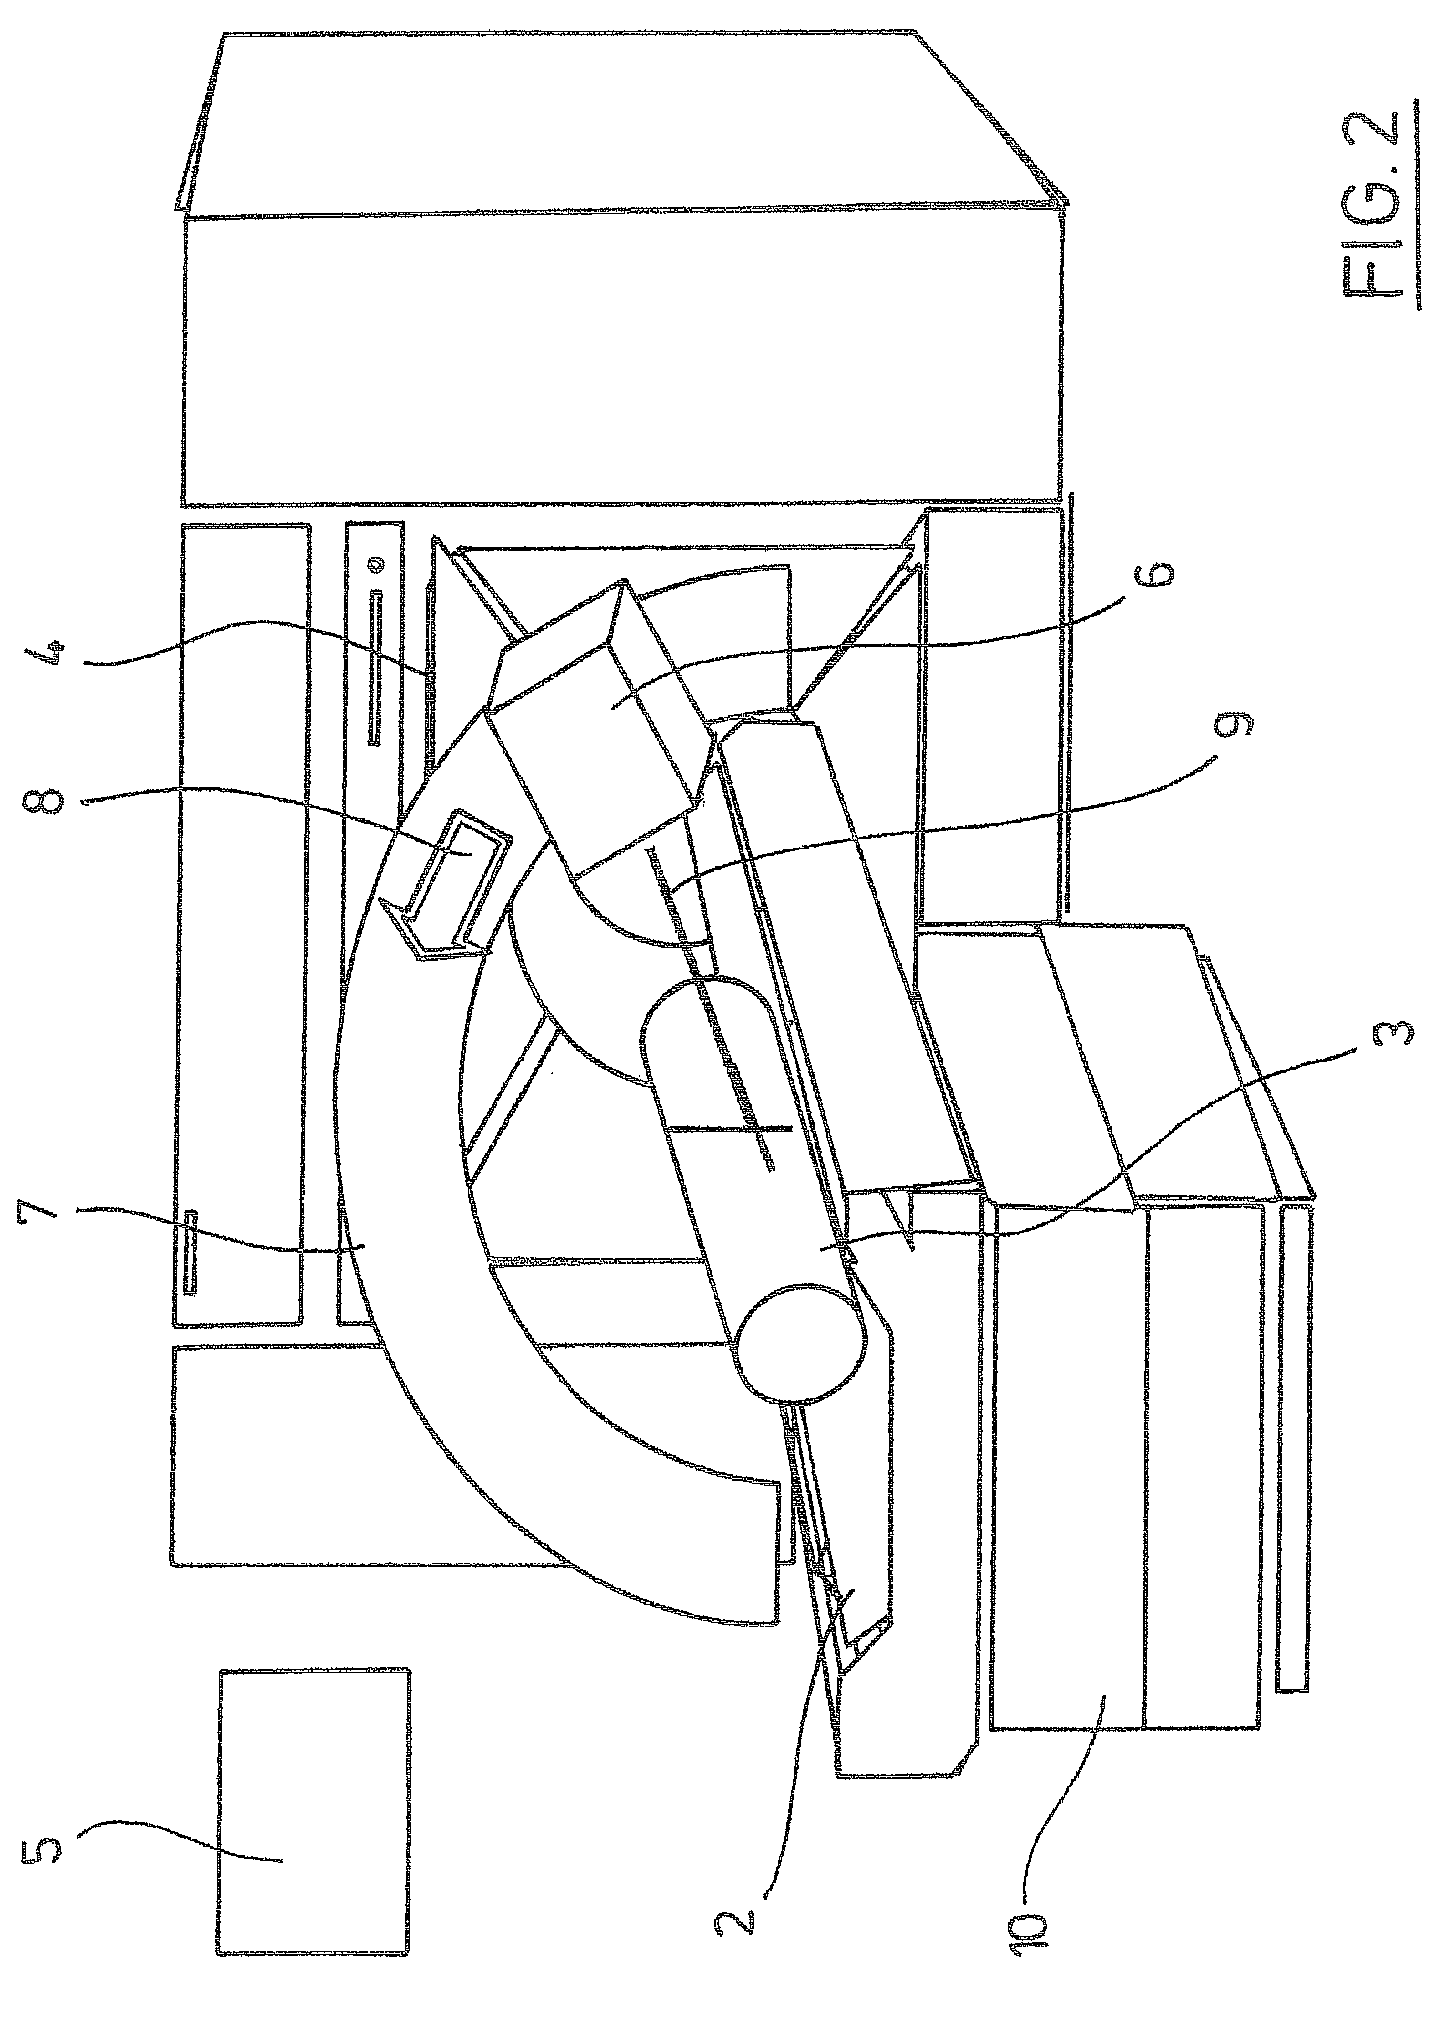 Apparatus and method for the representation of an area on the surface of a patient's body